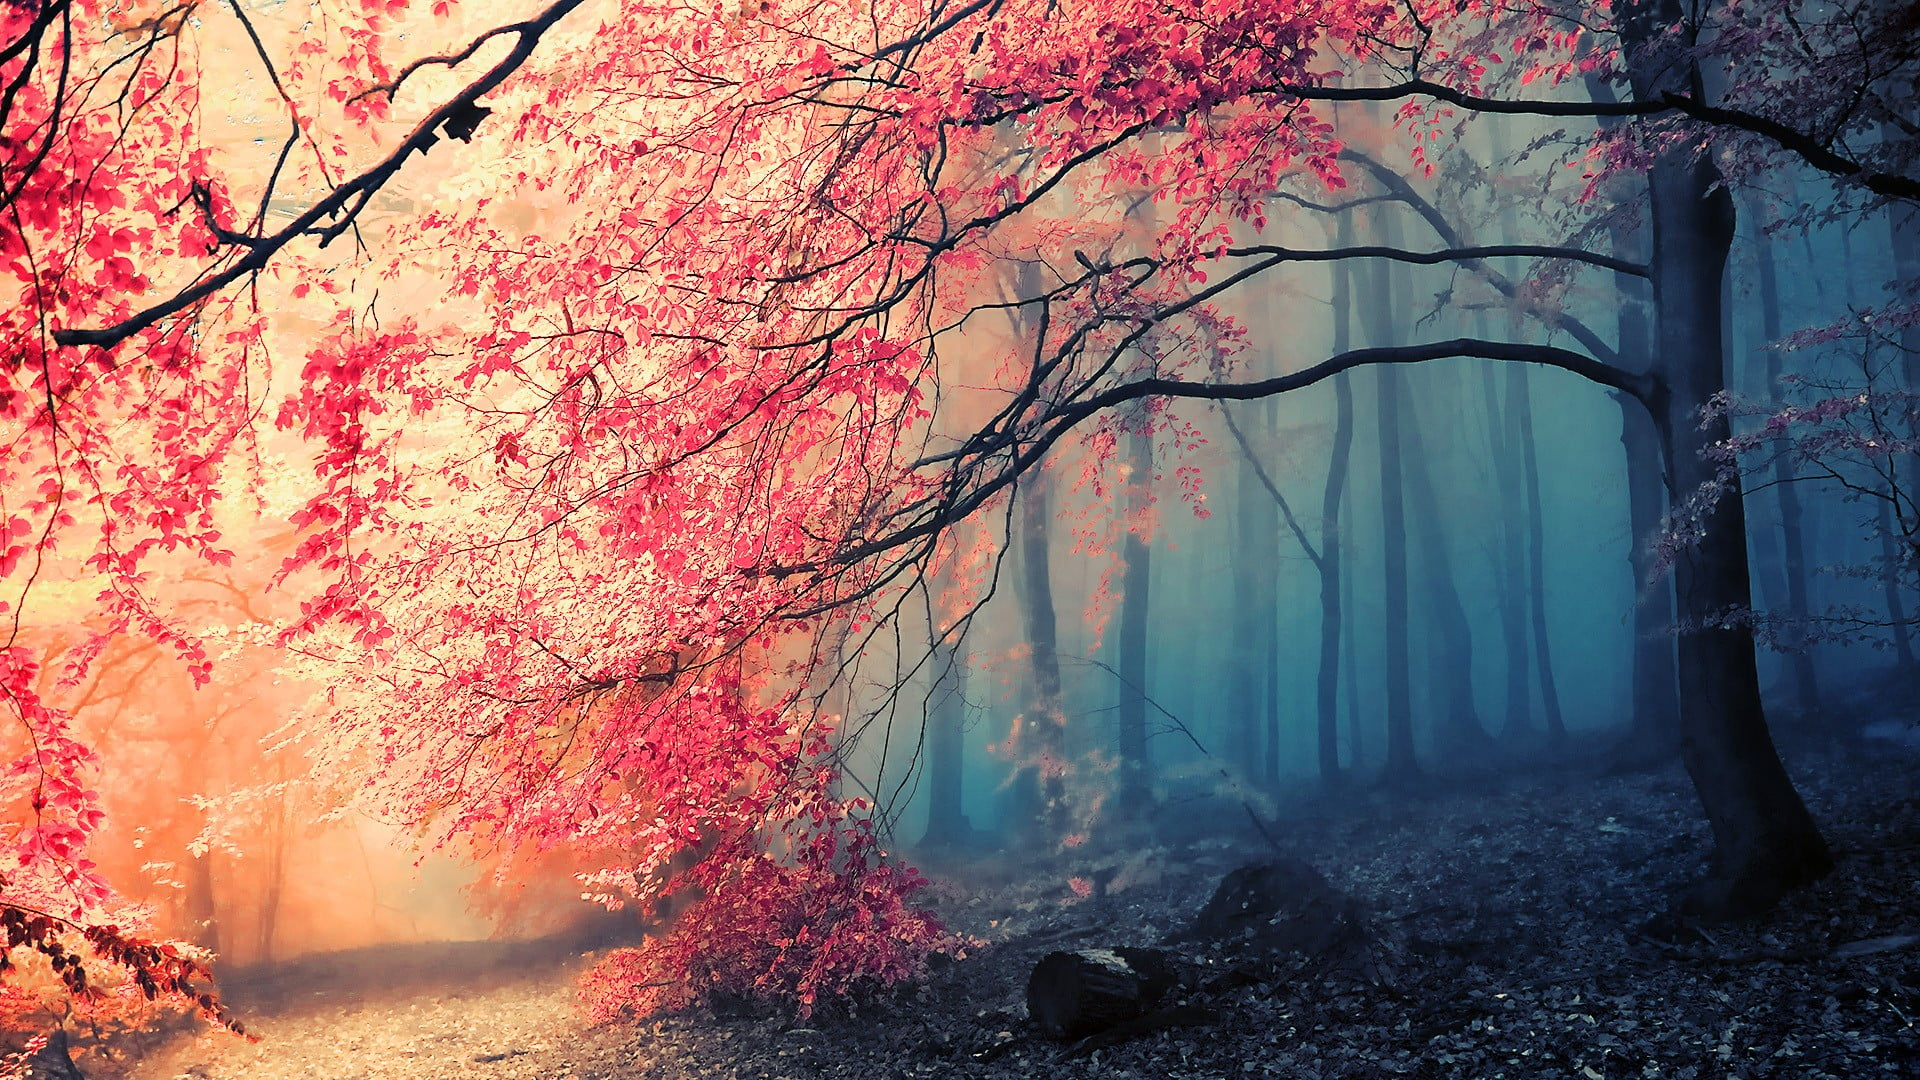 Pink flowering tree wallpaper, landscape photo of forest, nature, trees